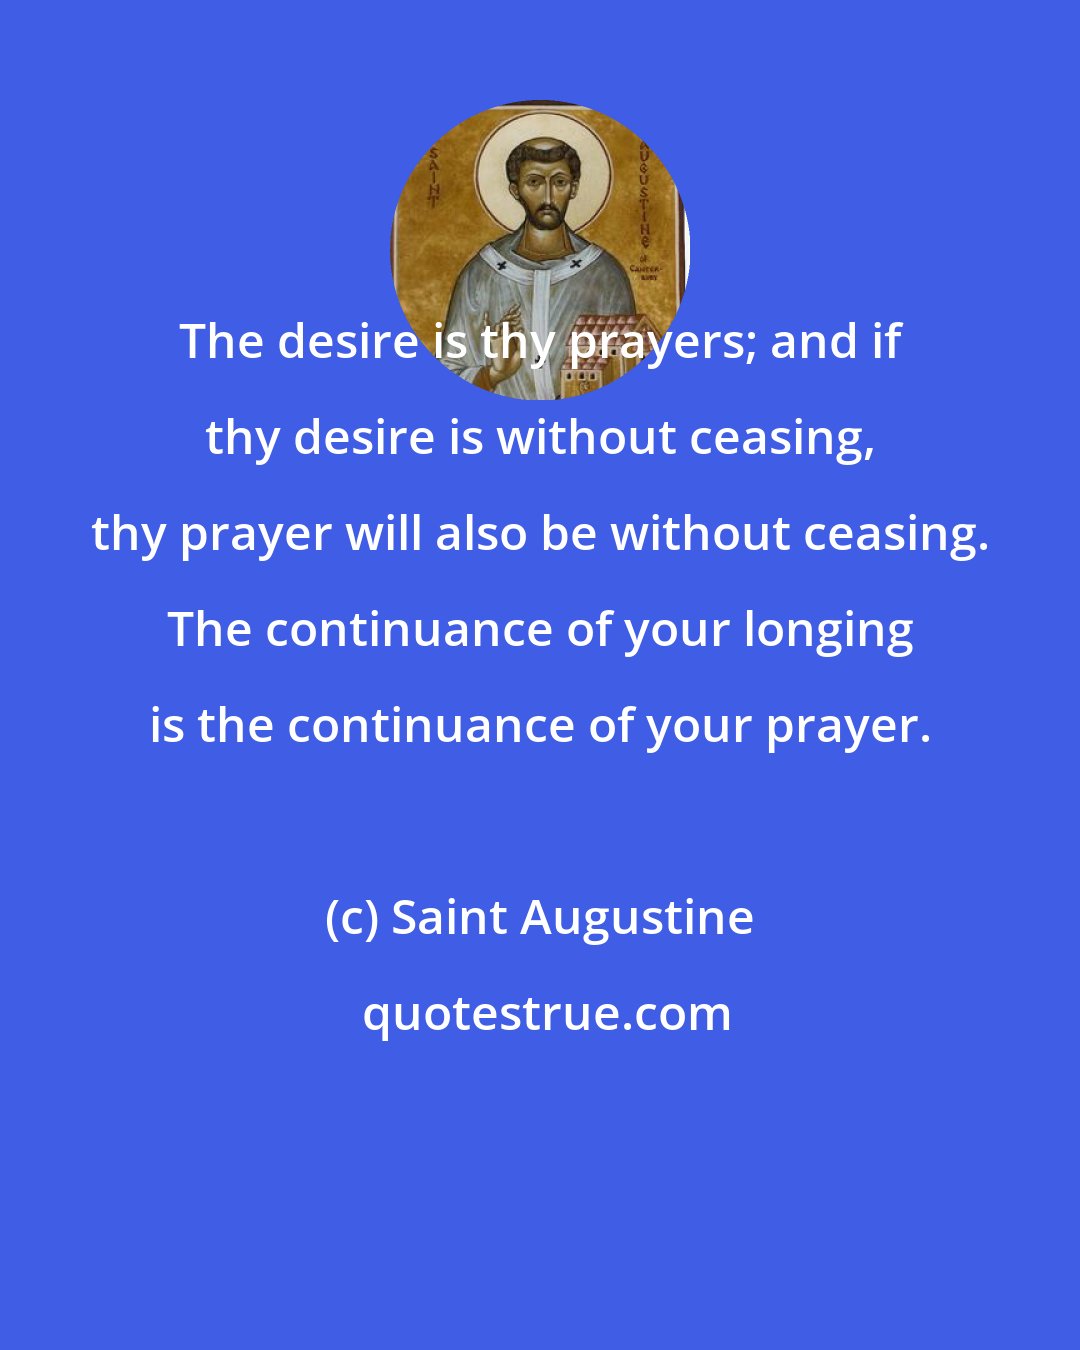 Saint Augustine: The desire is thy prayers; and if thy desire is without ceasing, thy prayer will also be without ceasing. The continuance of your longing is the continuance of your prayer.